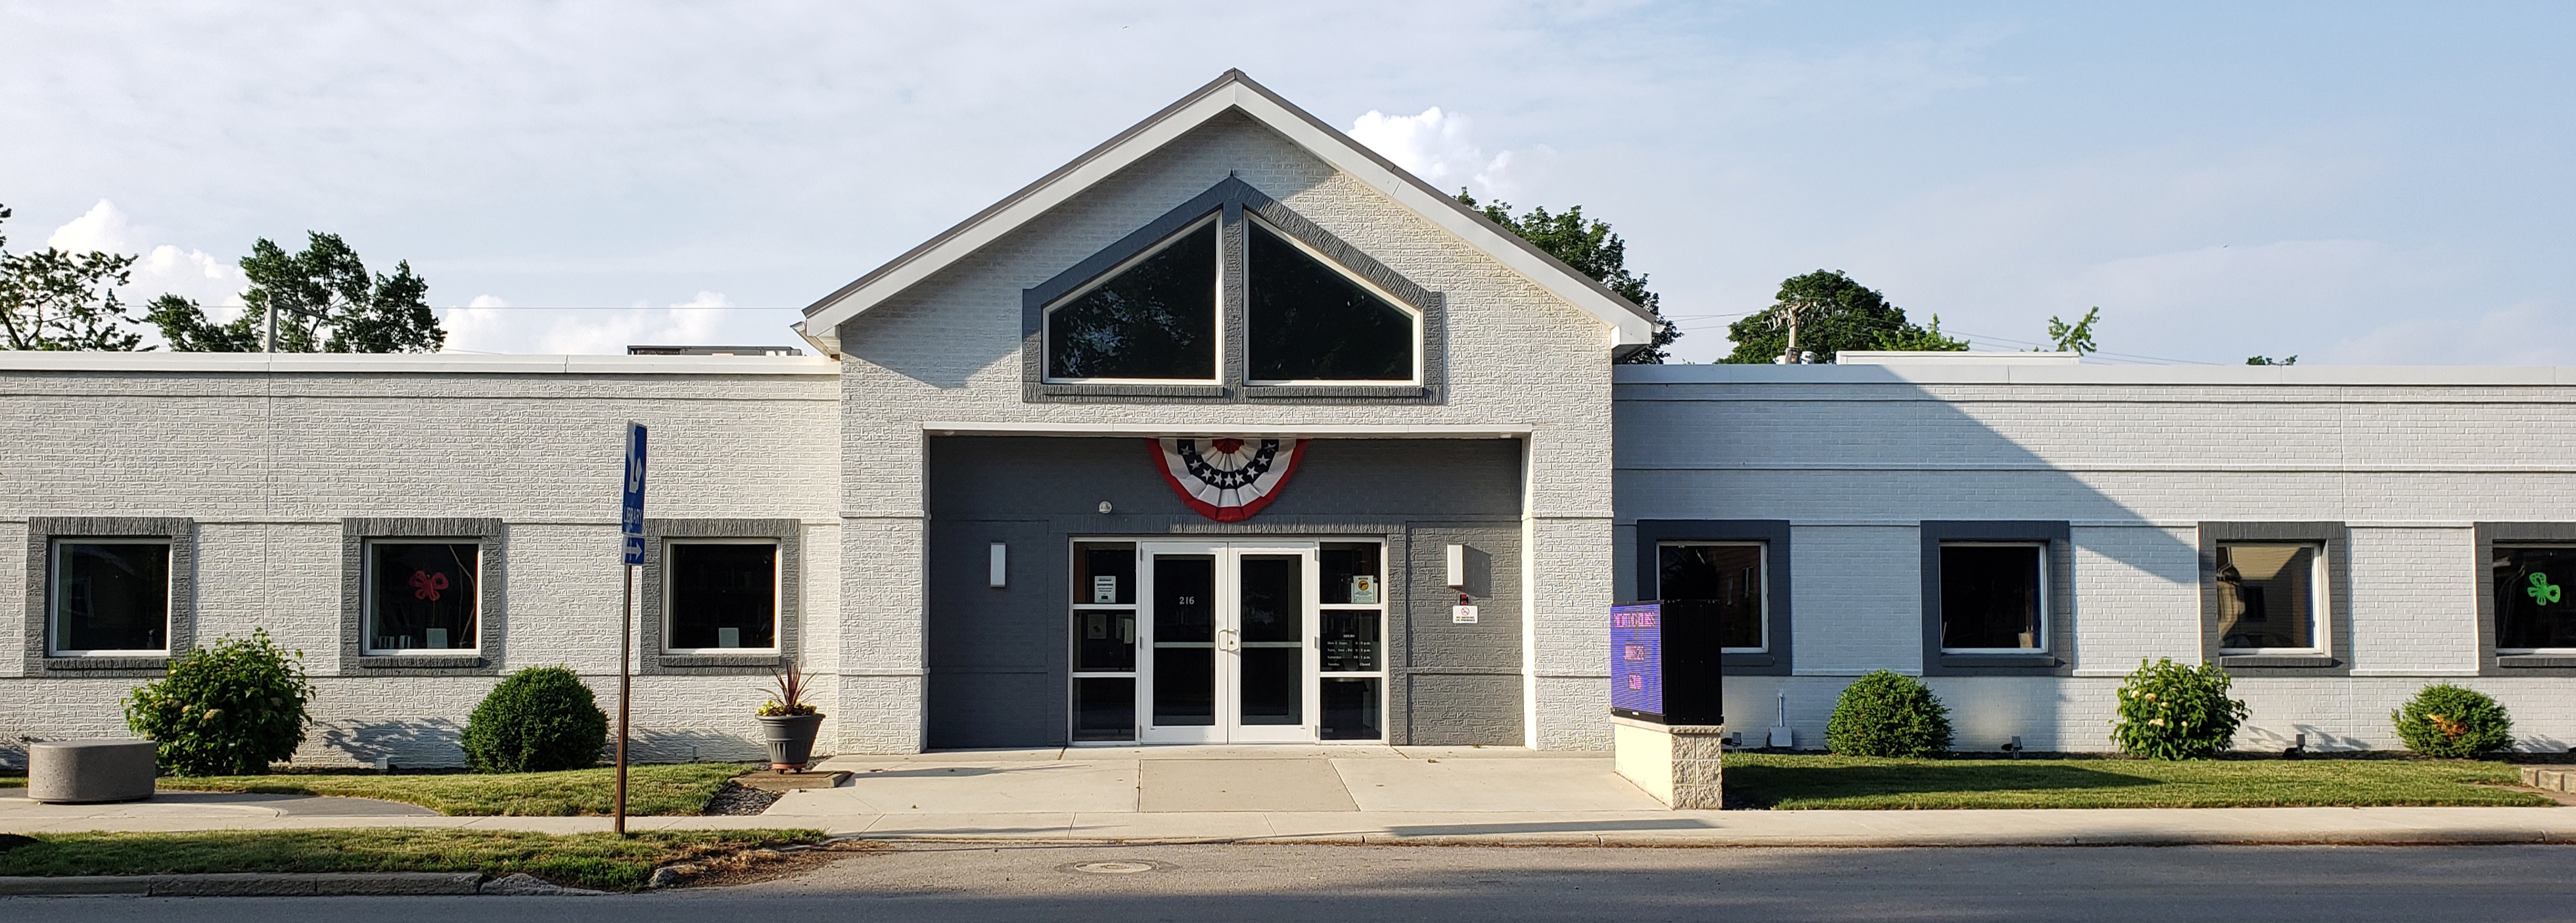 Exterior view of the front of Montpelier Public Library